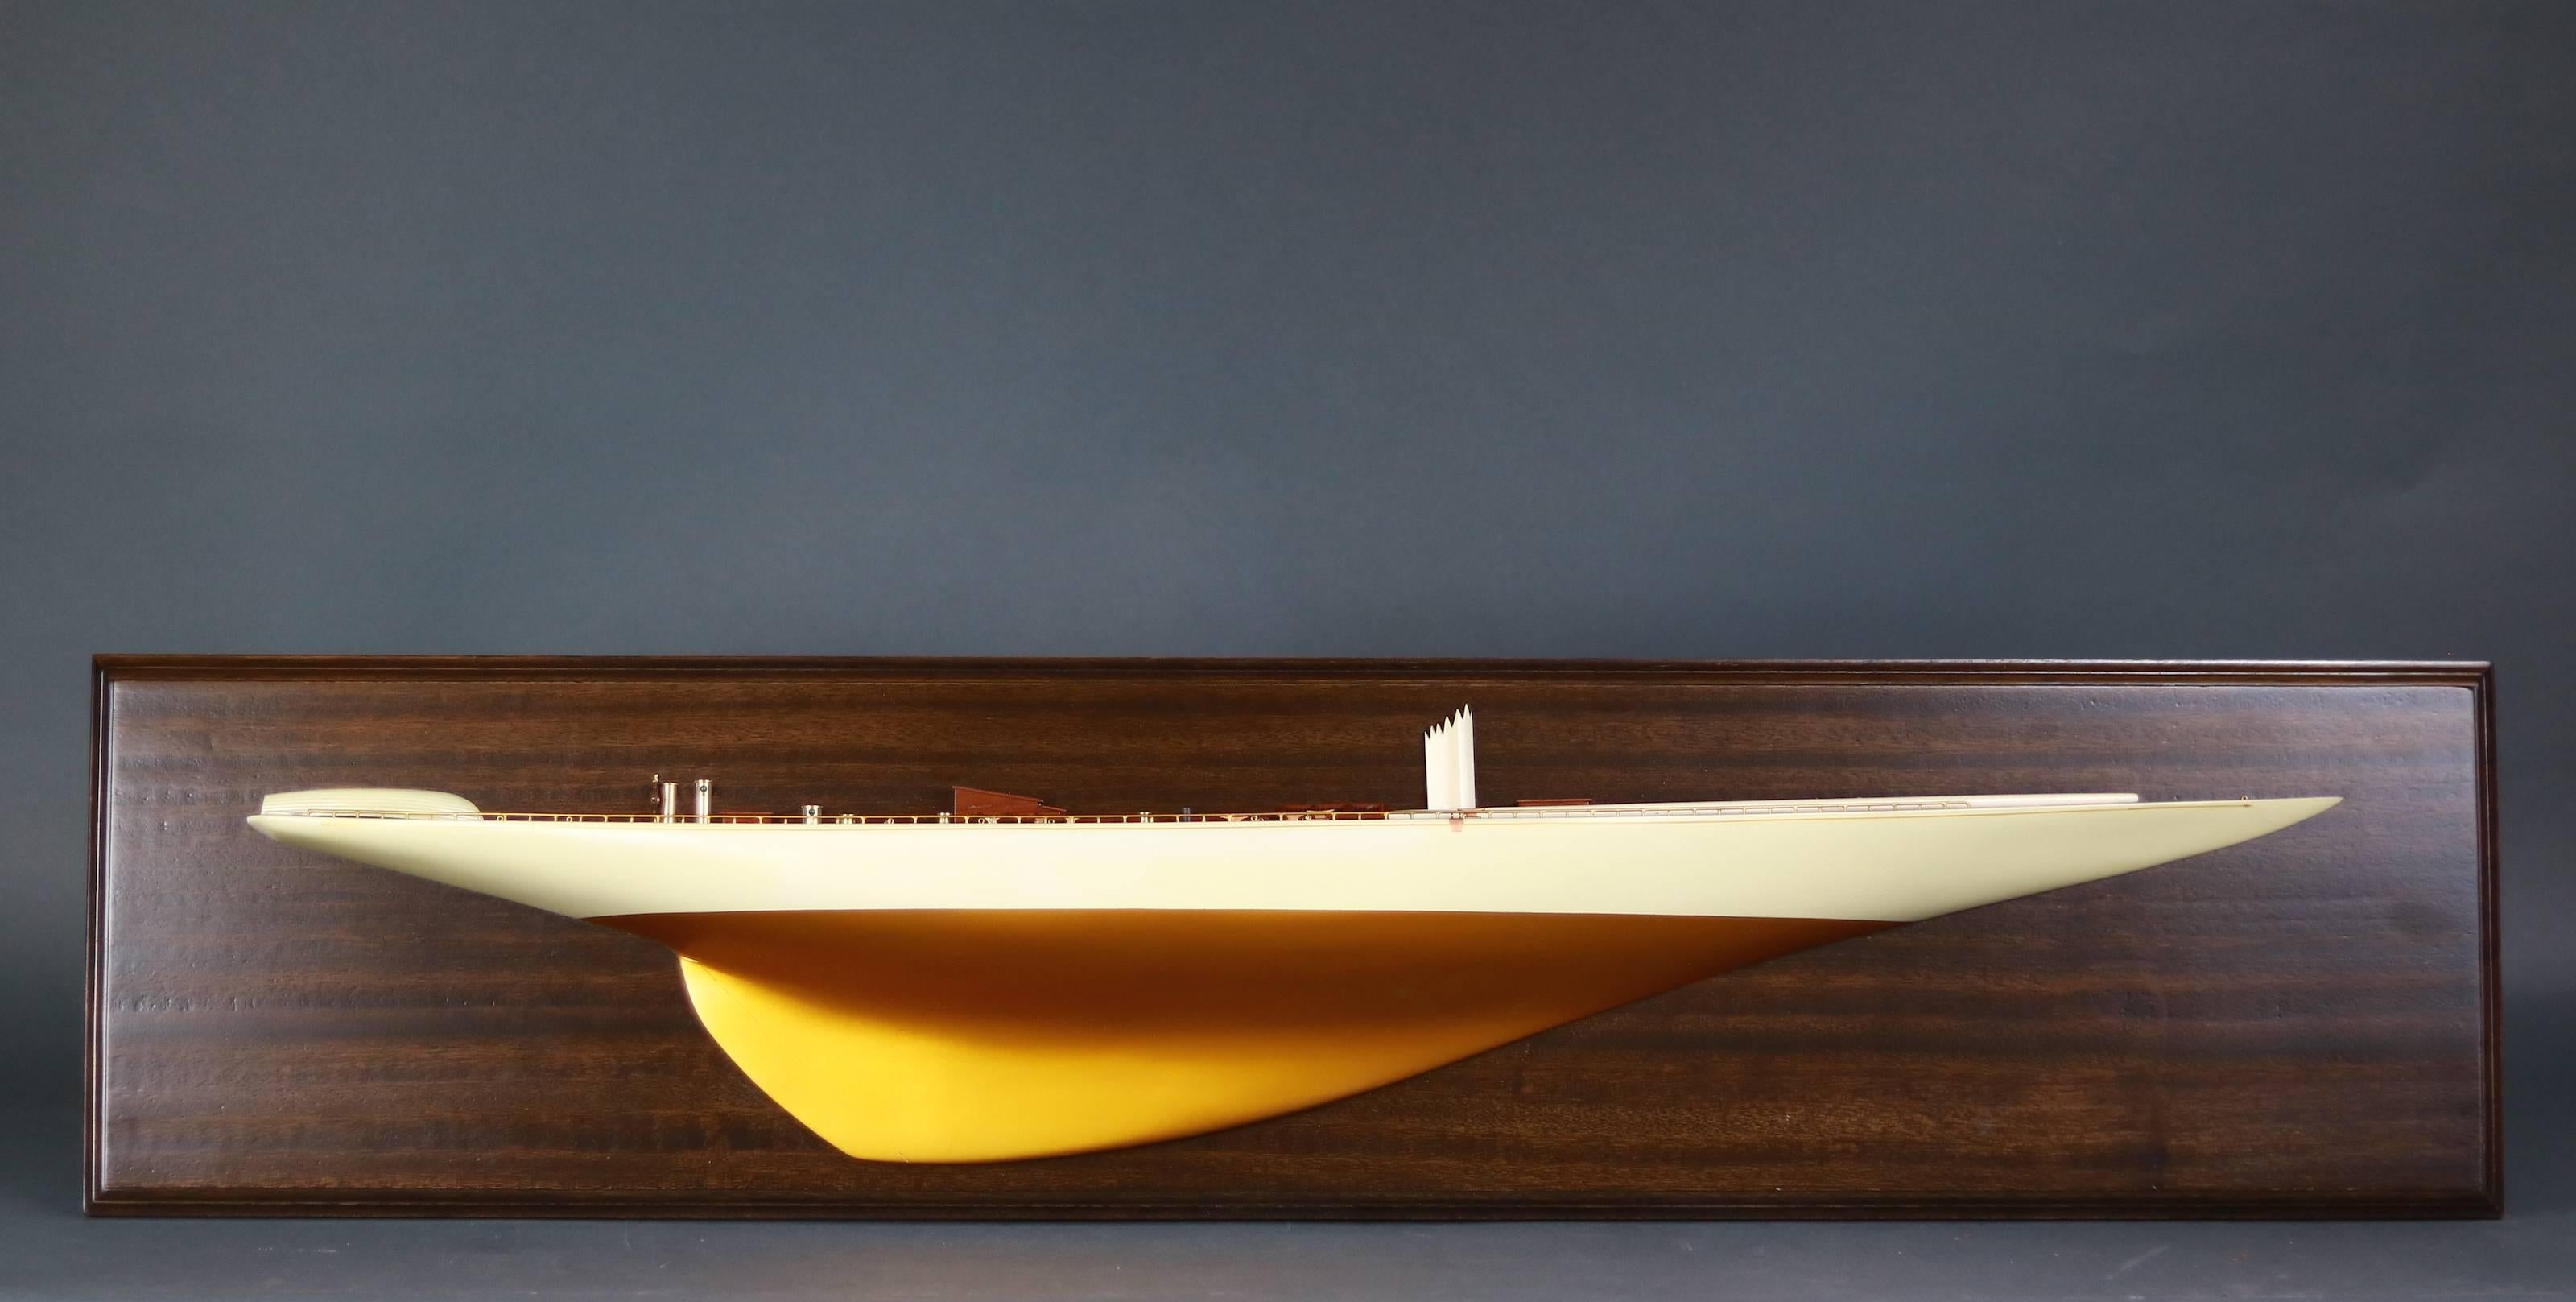 Half model mounted onto a mahogany backboard of the 1934 America's Cup yacht Rainbow.

Model is painted ivory above the waterline and metallic gold below the waterline. Very detailed.

Measure: 42 1/2